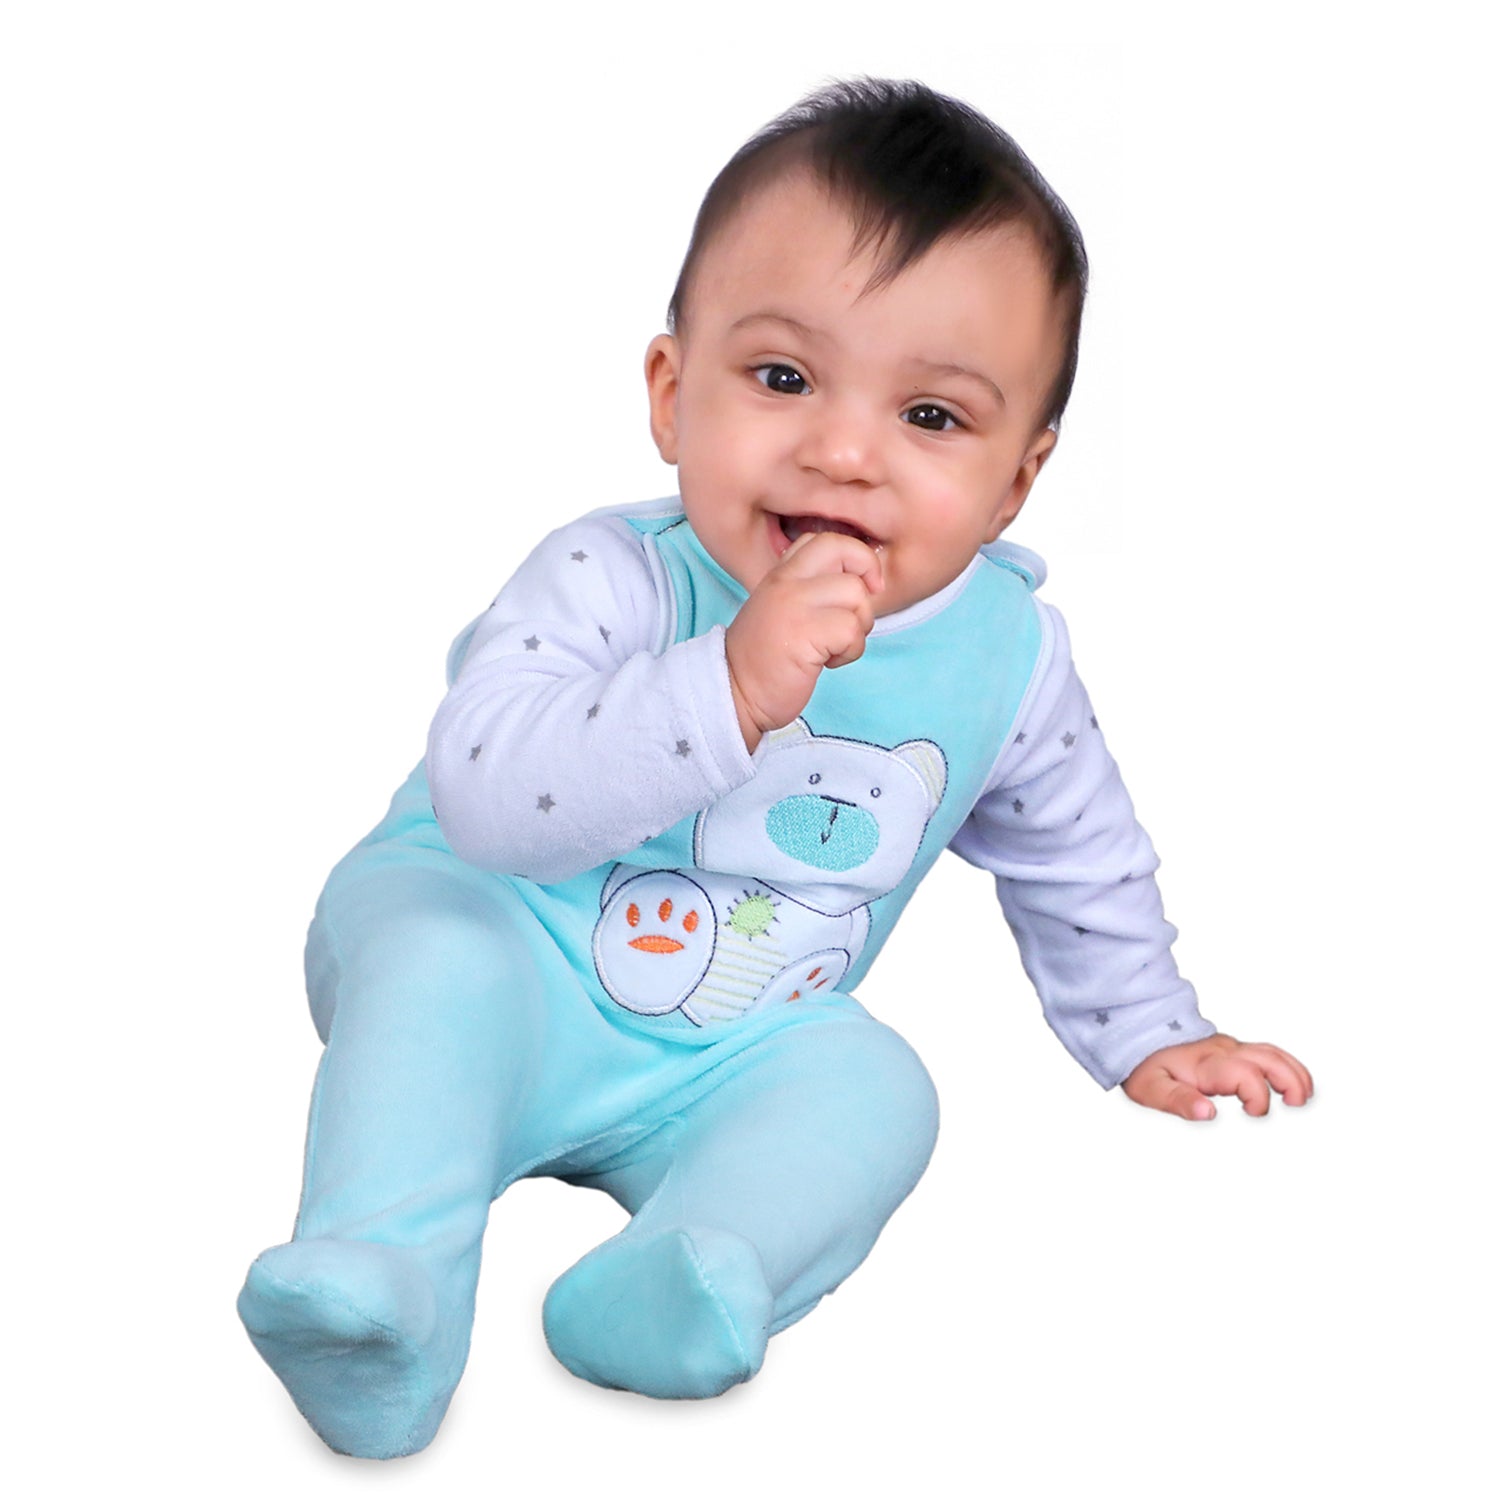 Cuddly Bear Infant 2 Piece Full Sleeves Tshirt And Romper Set - Turquoise